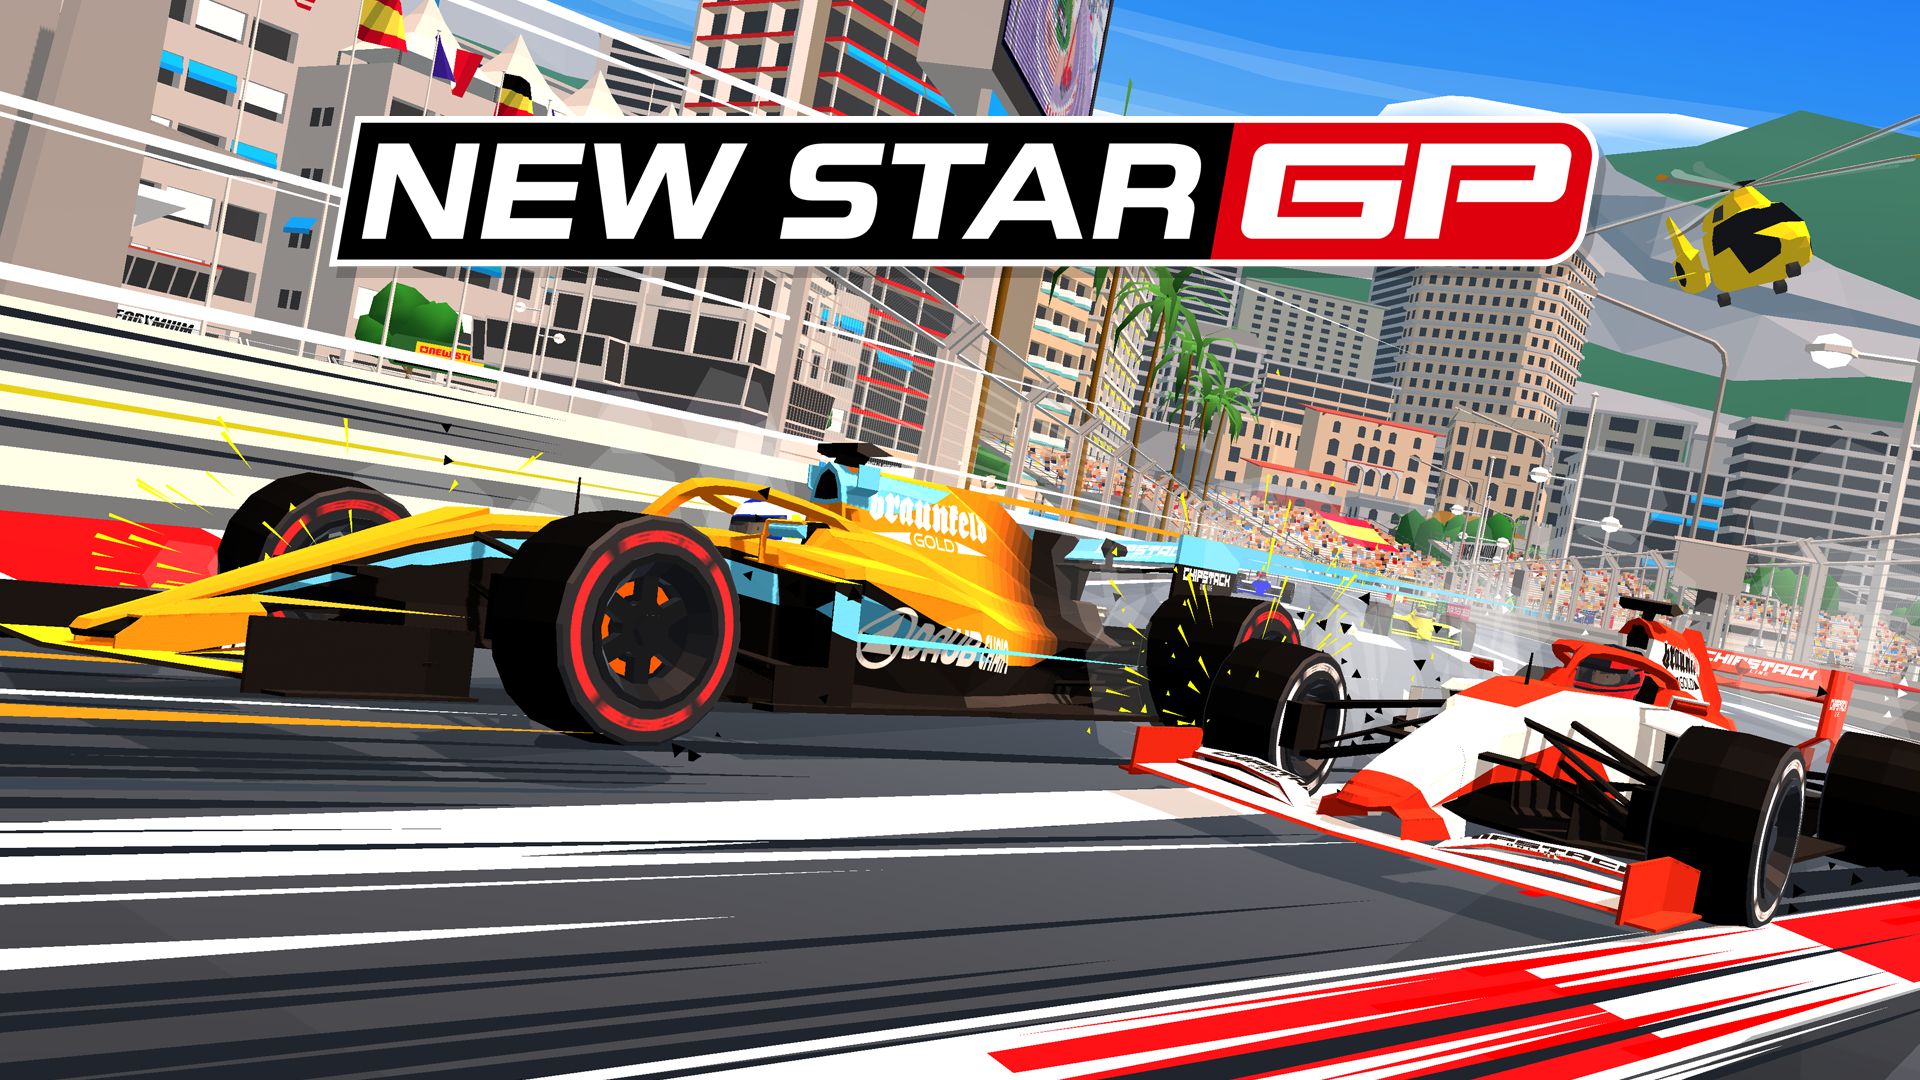 New Star GP (Five Aces Publishing/New Star Games) Asset